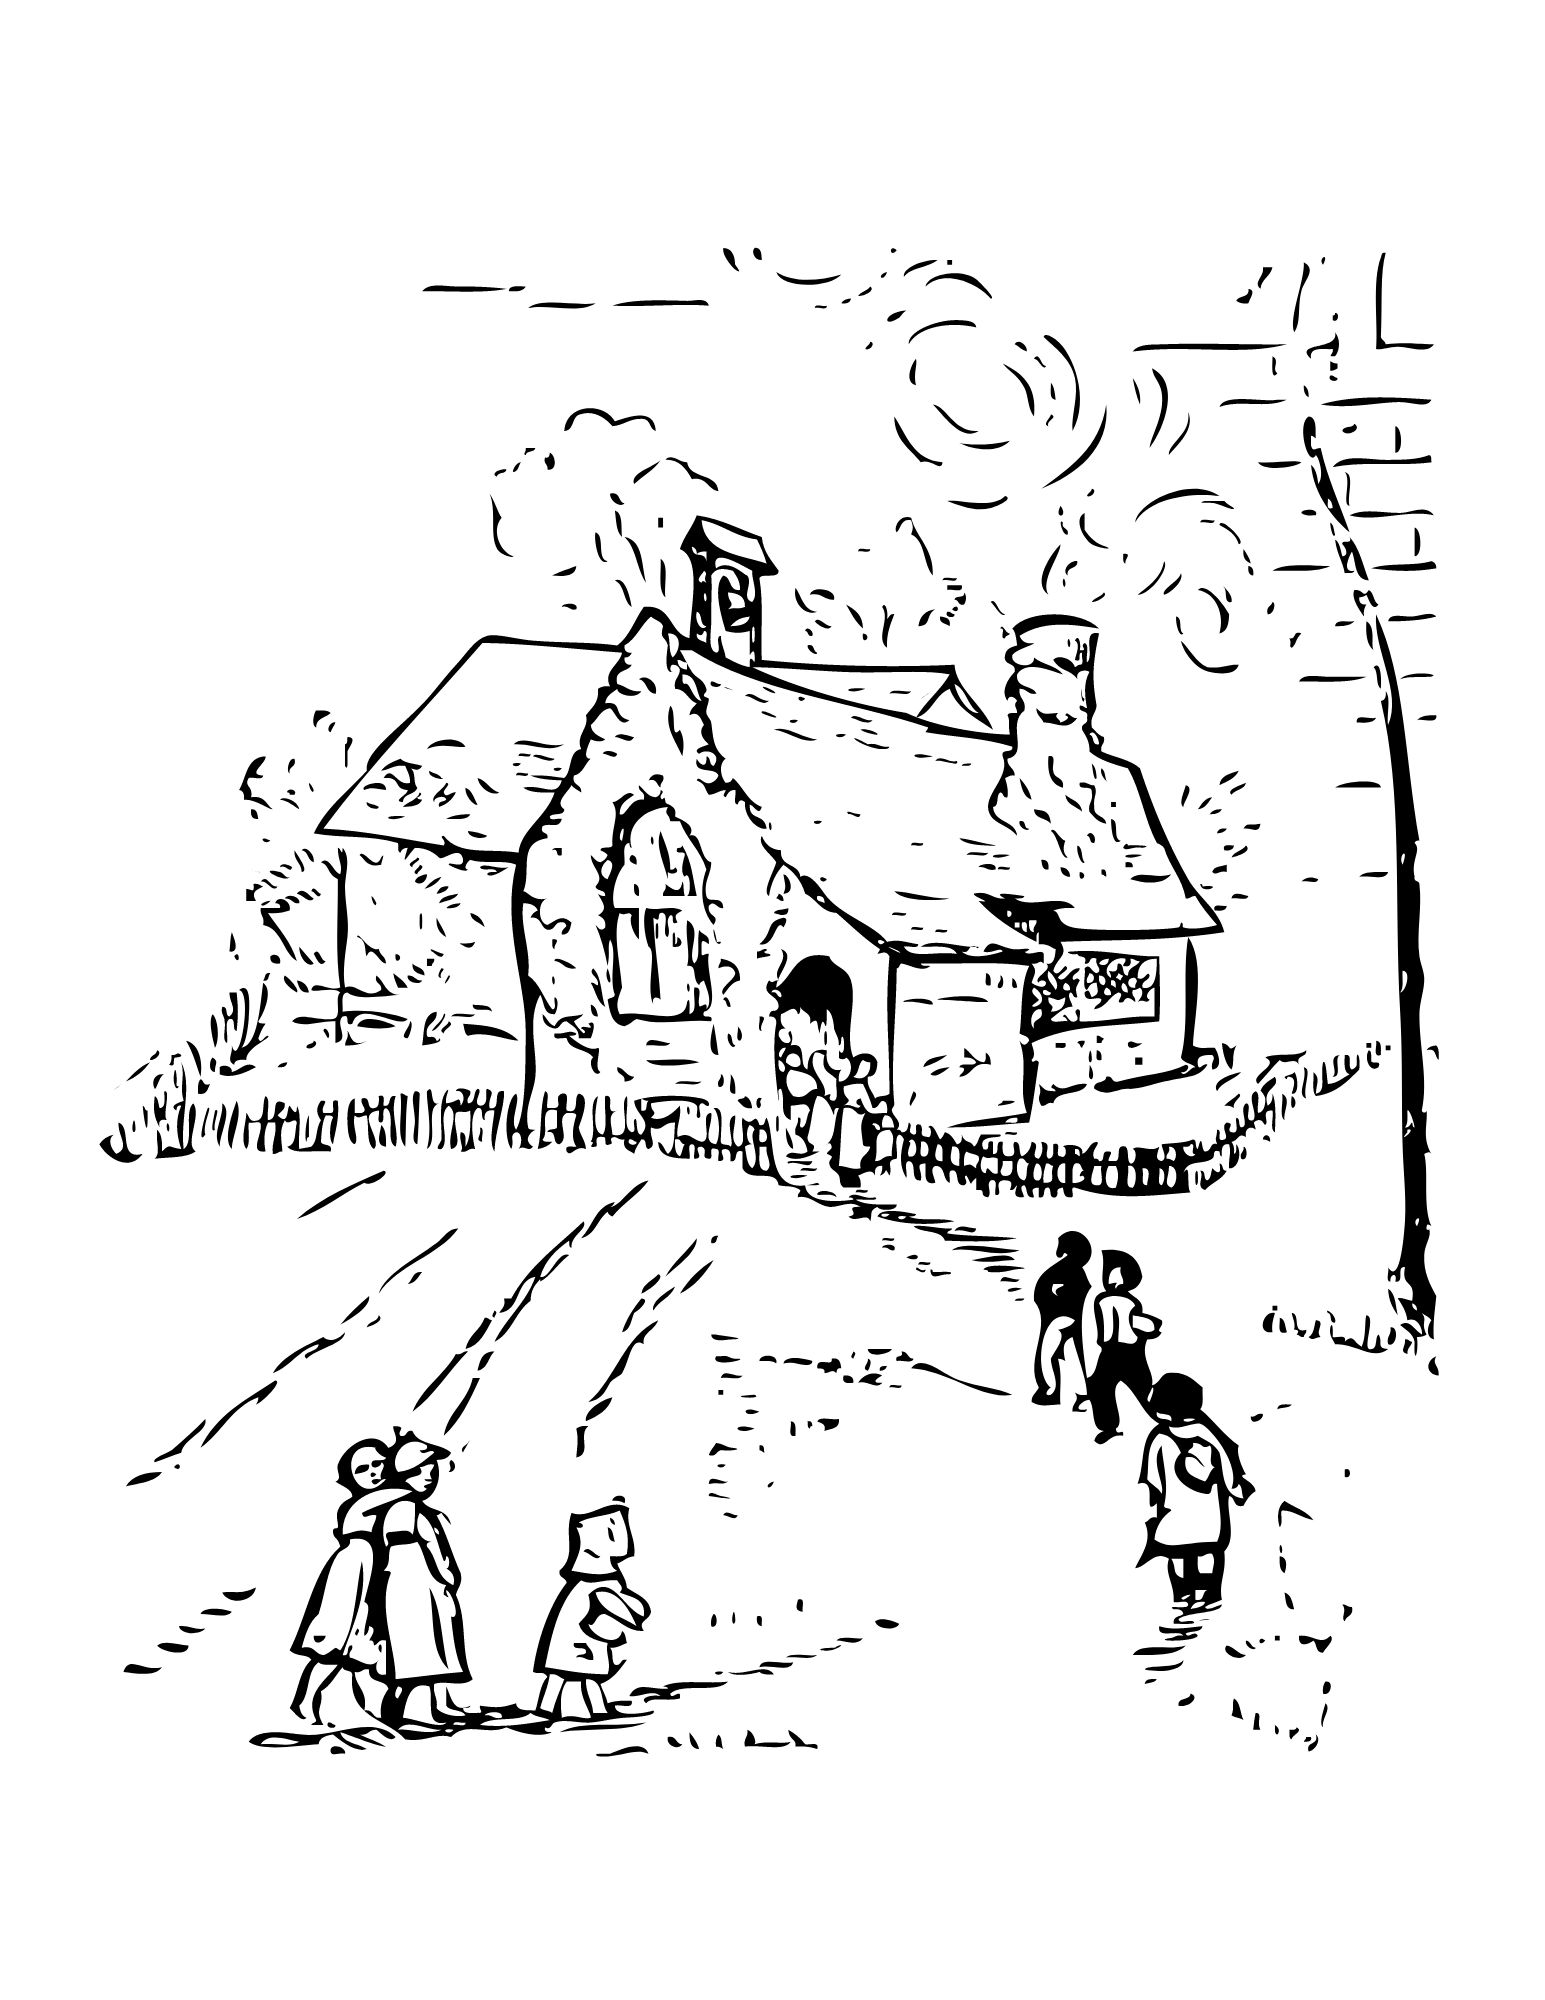 a home or schoolhouse in the country with woman at door greeting children walking toward it